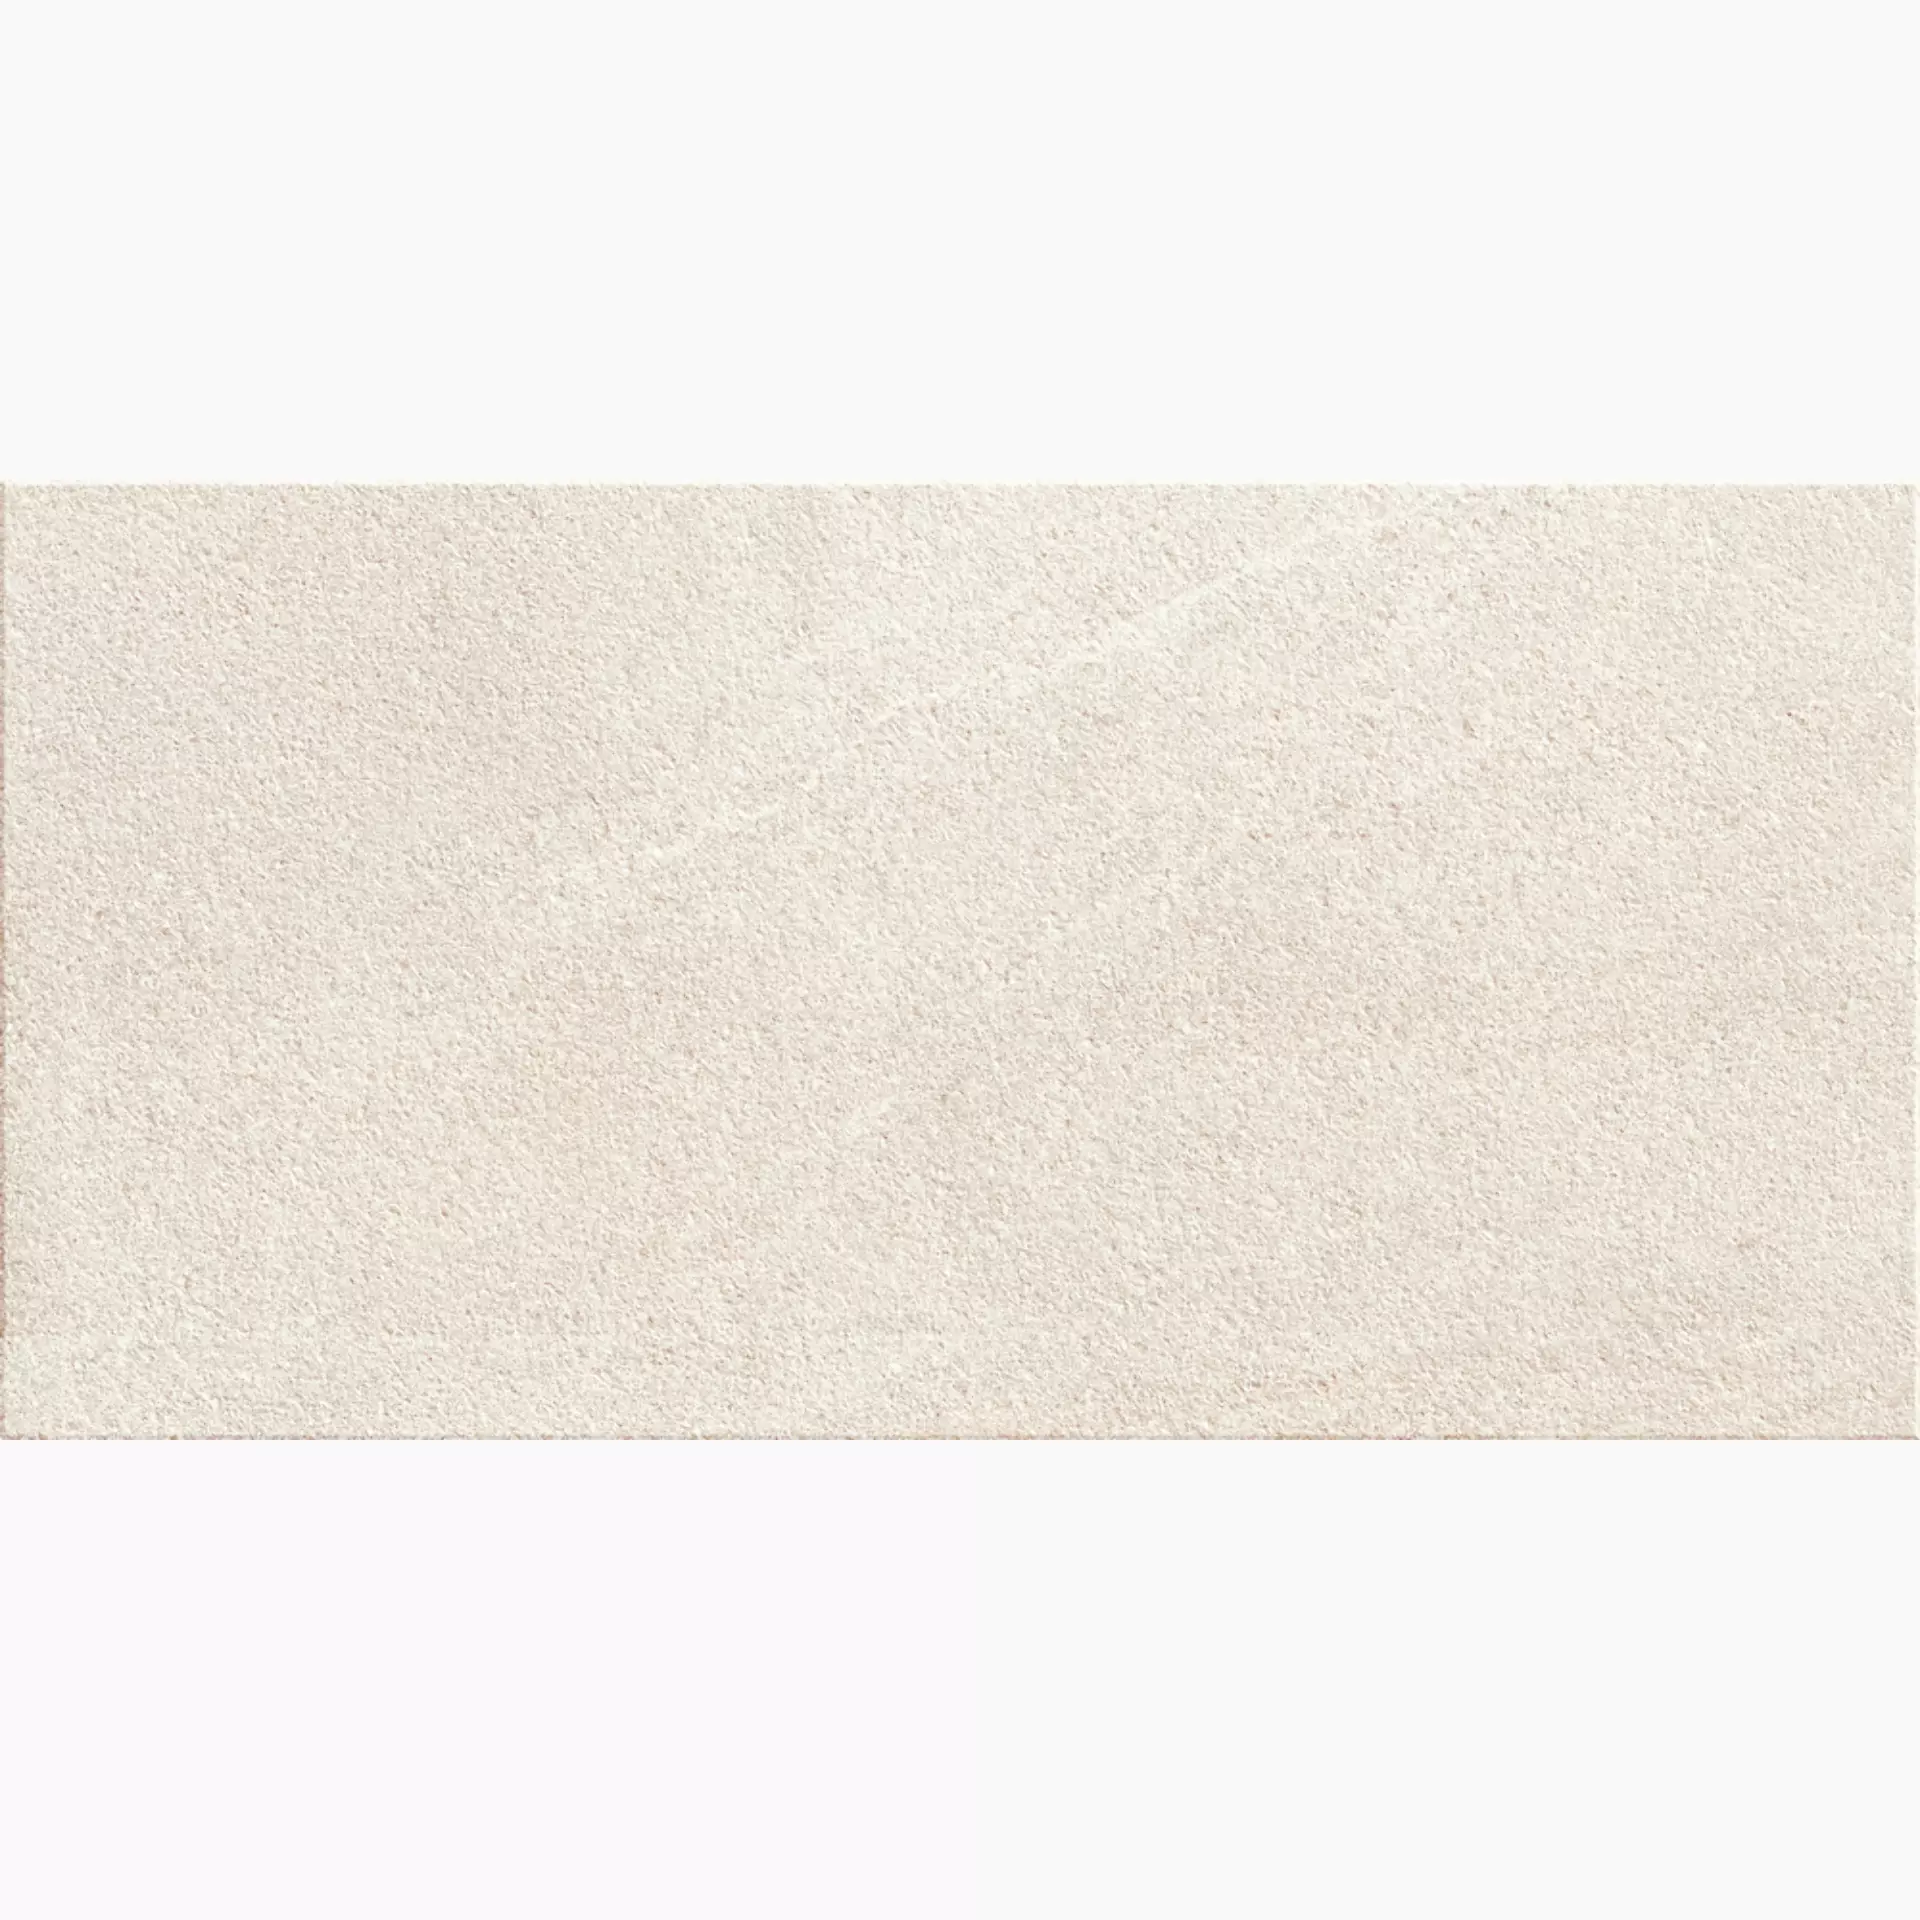 Cottodeste Limestone Clay Blazed Protect EGXLS61 60x120cm rectified 20mm